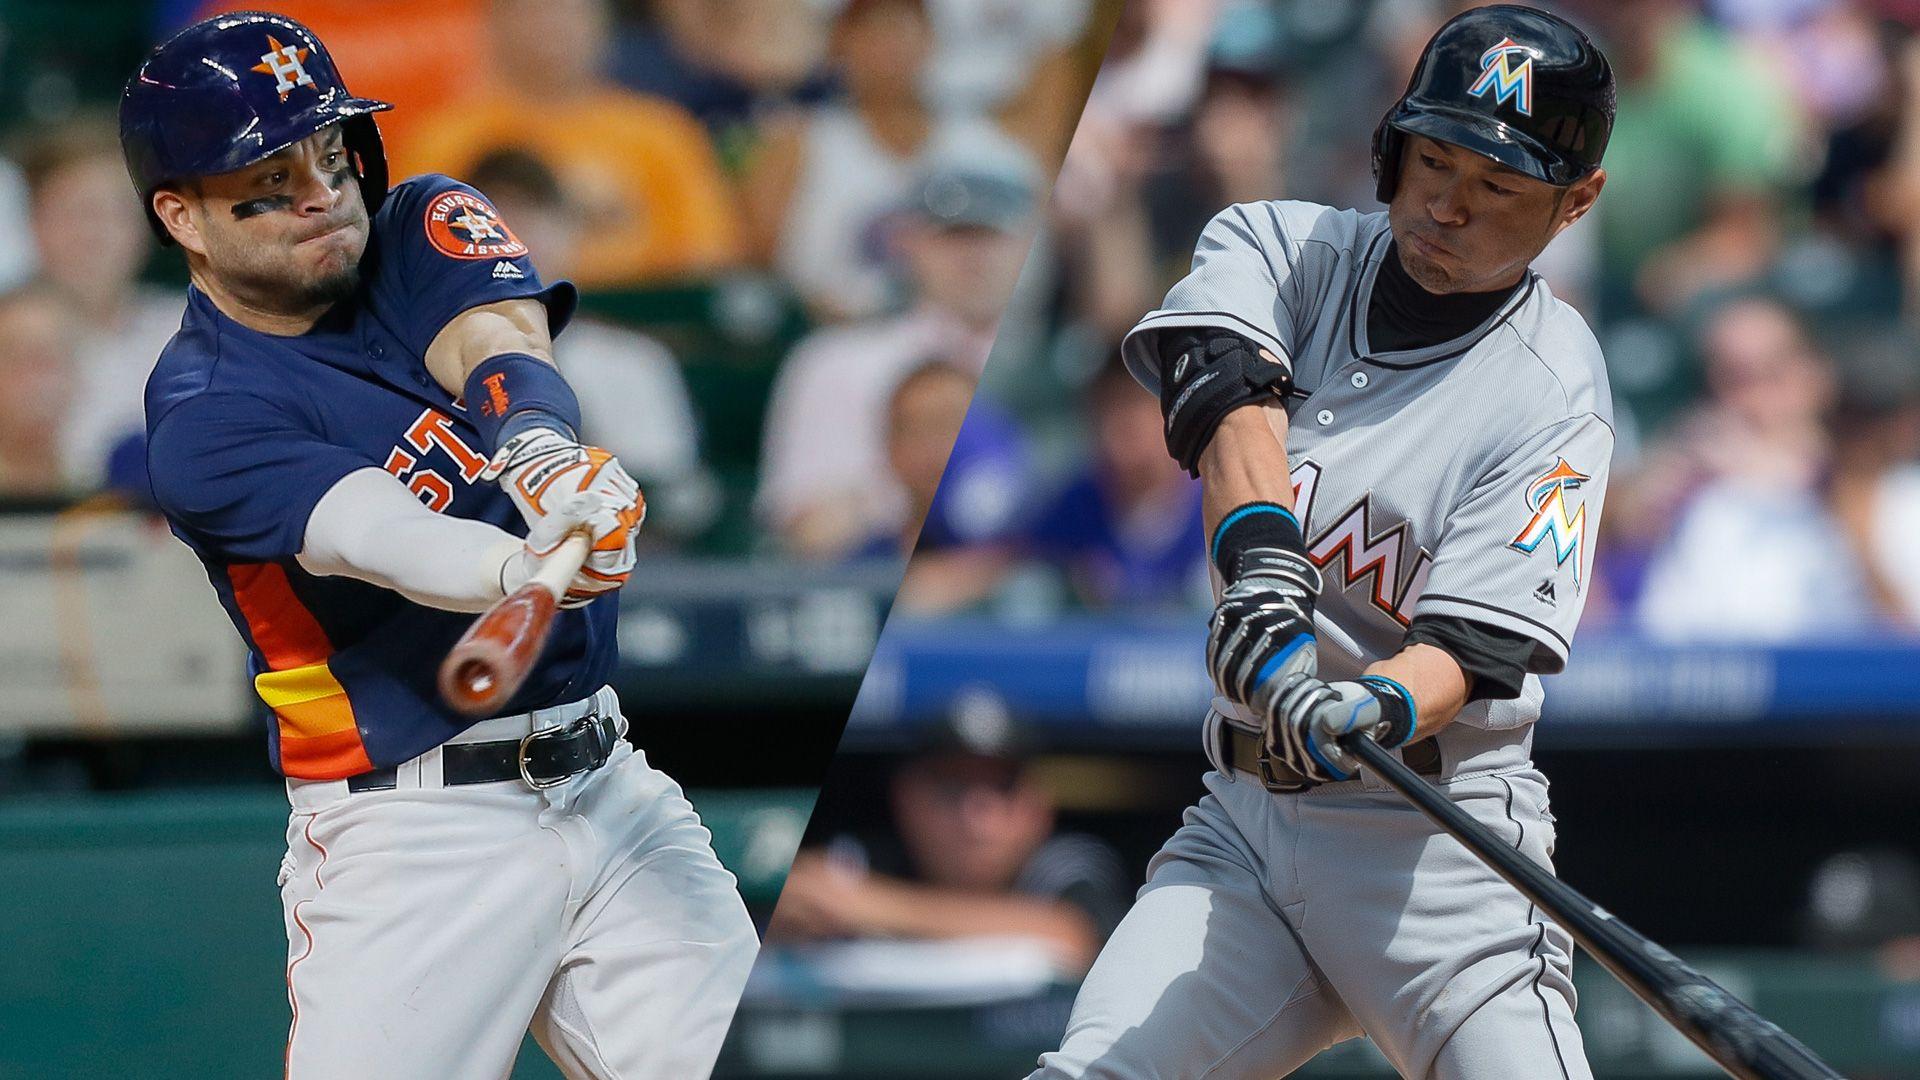 Matching Ichiro? Only Jose Altuve has a chance, and don't count